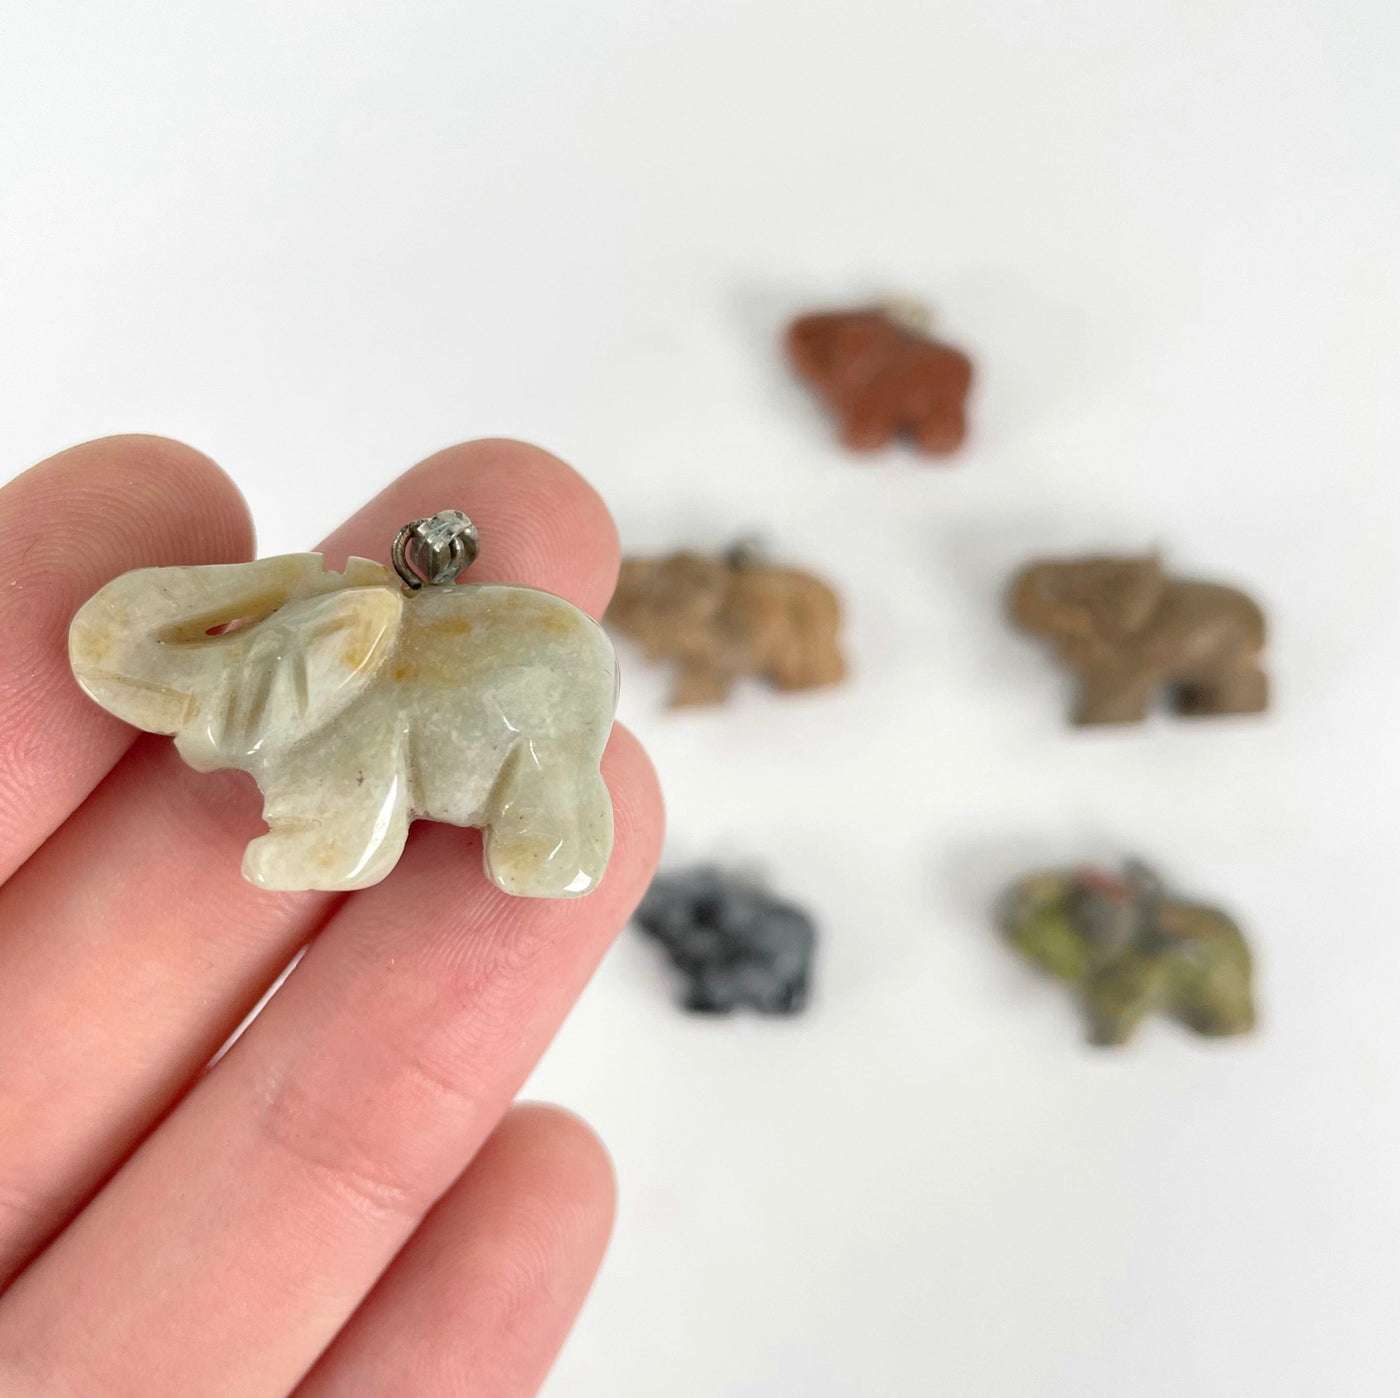 elephant pendants in hand and on display for size reference